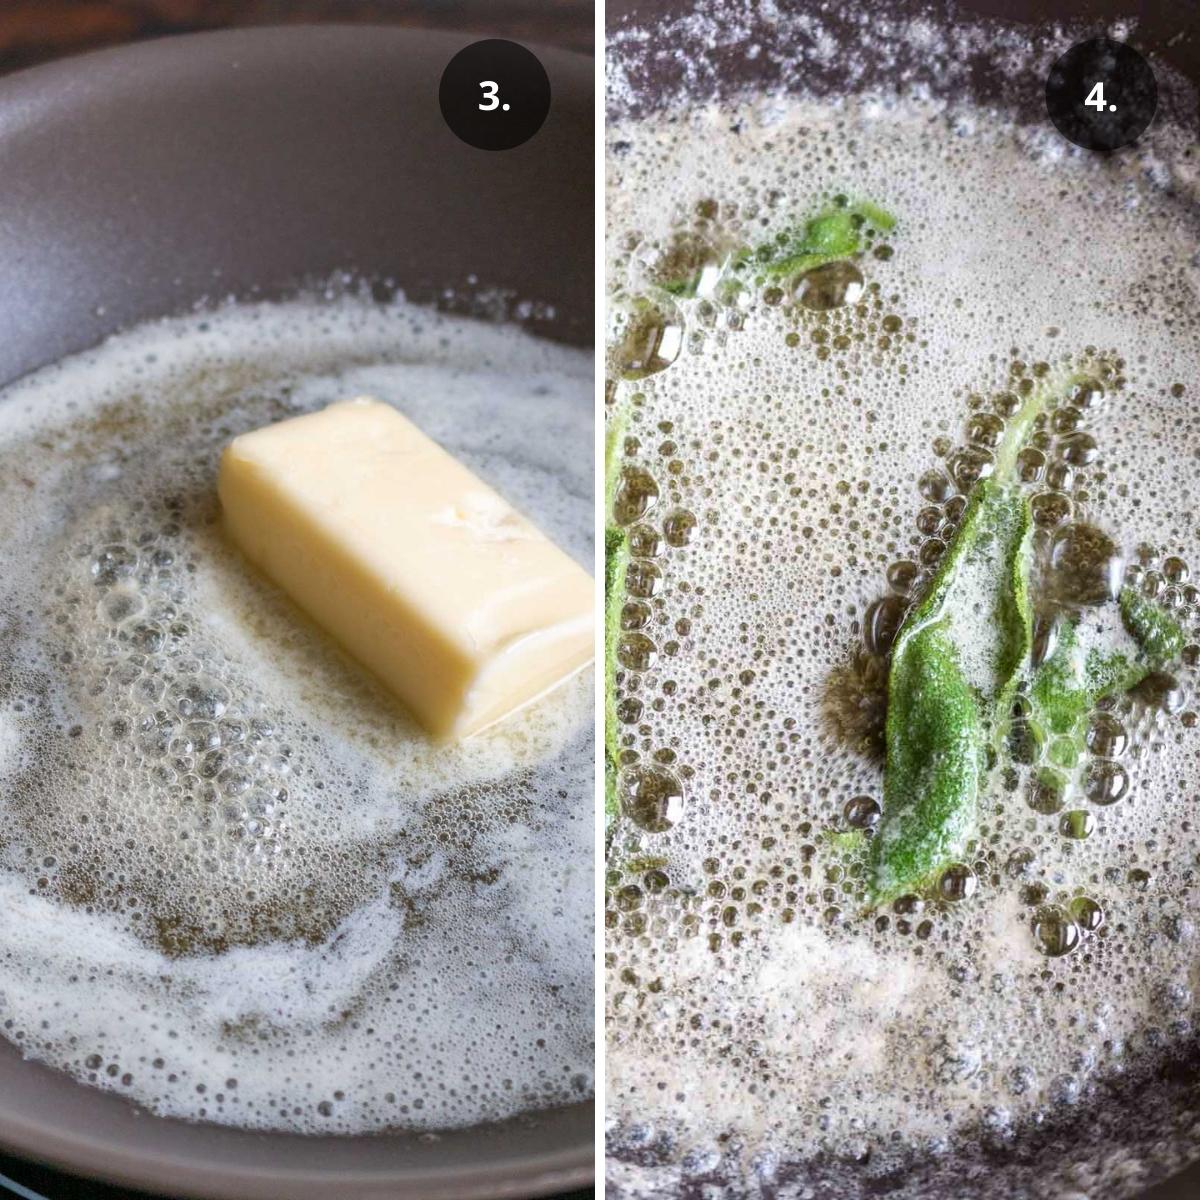 Butter getting melted and sage leaves frying in a pan.